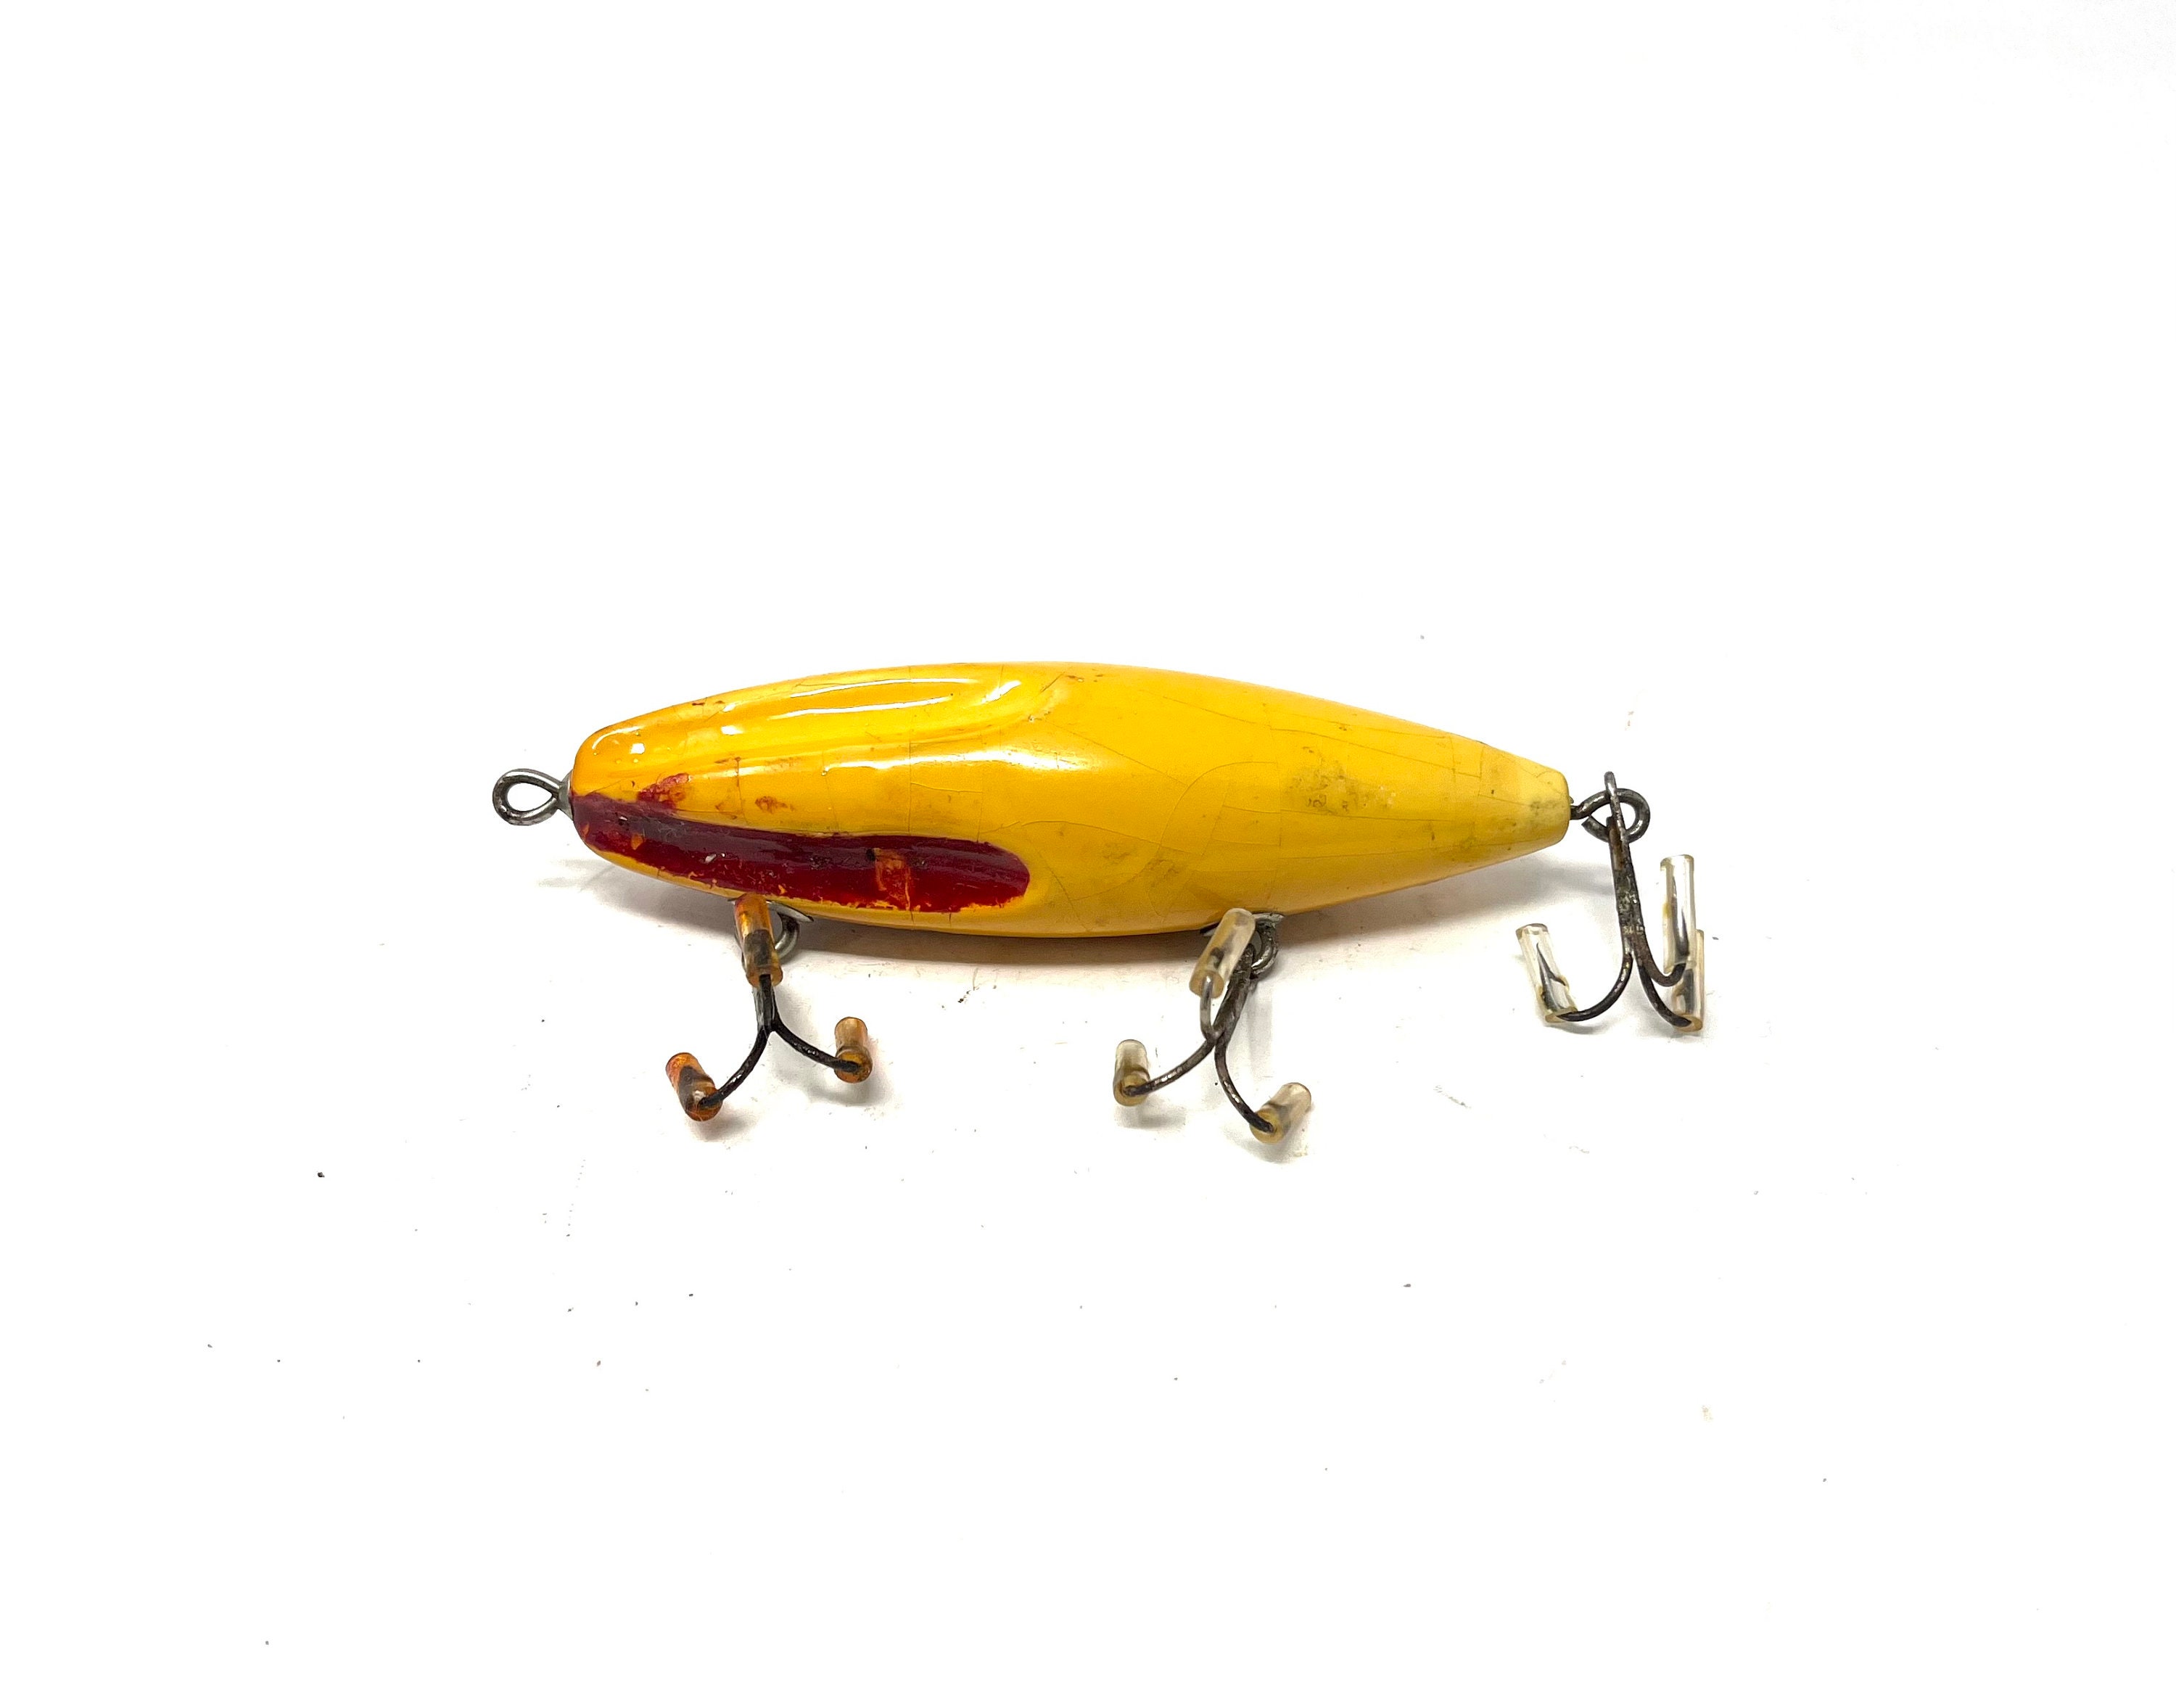 Snook Bait Company Saltwater Fishing Lure 1949-1952. Antique